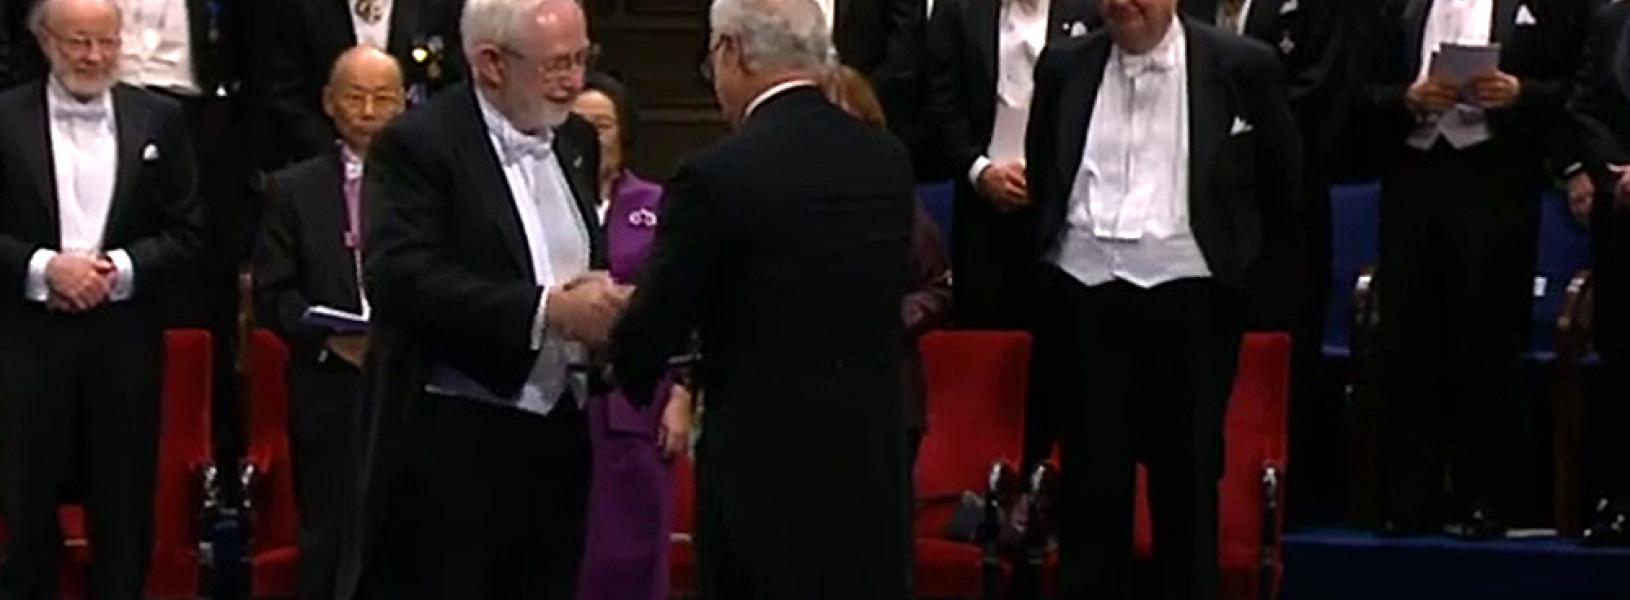 Dr. McDonald formally received his Nobel Prize from King Carl XVI Gustaf of Sweden in a ceremony at the Stockholm Concert Hall.